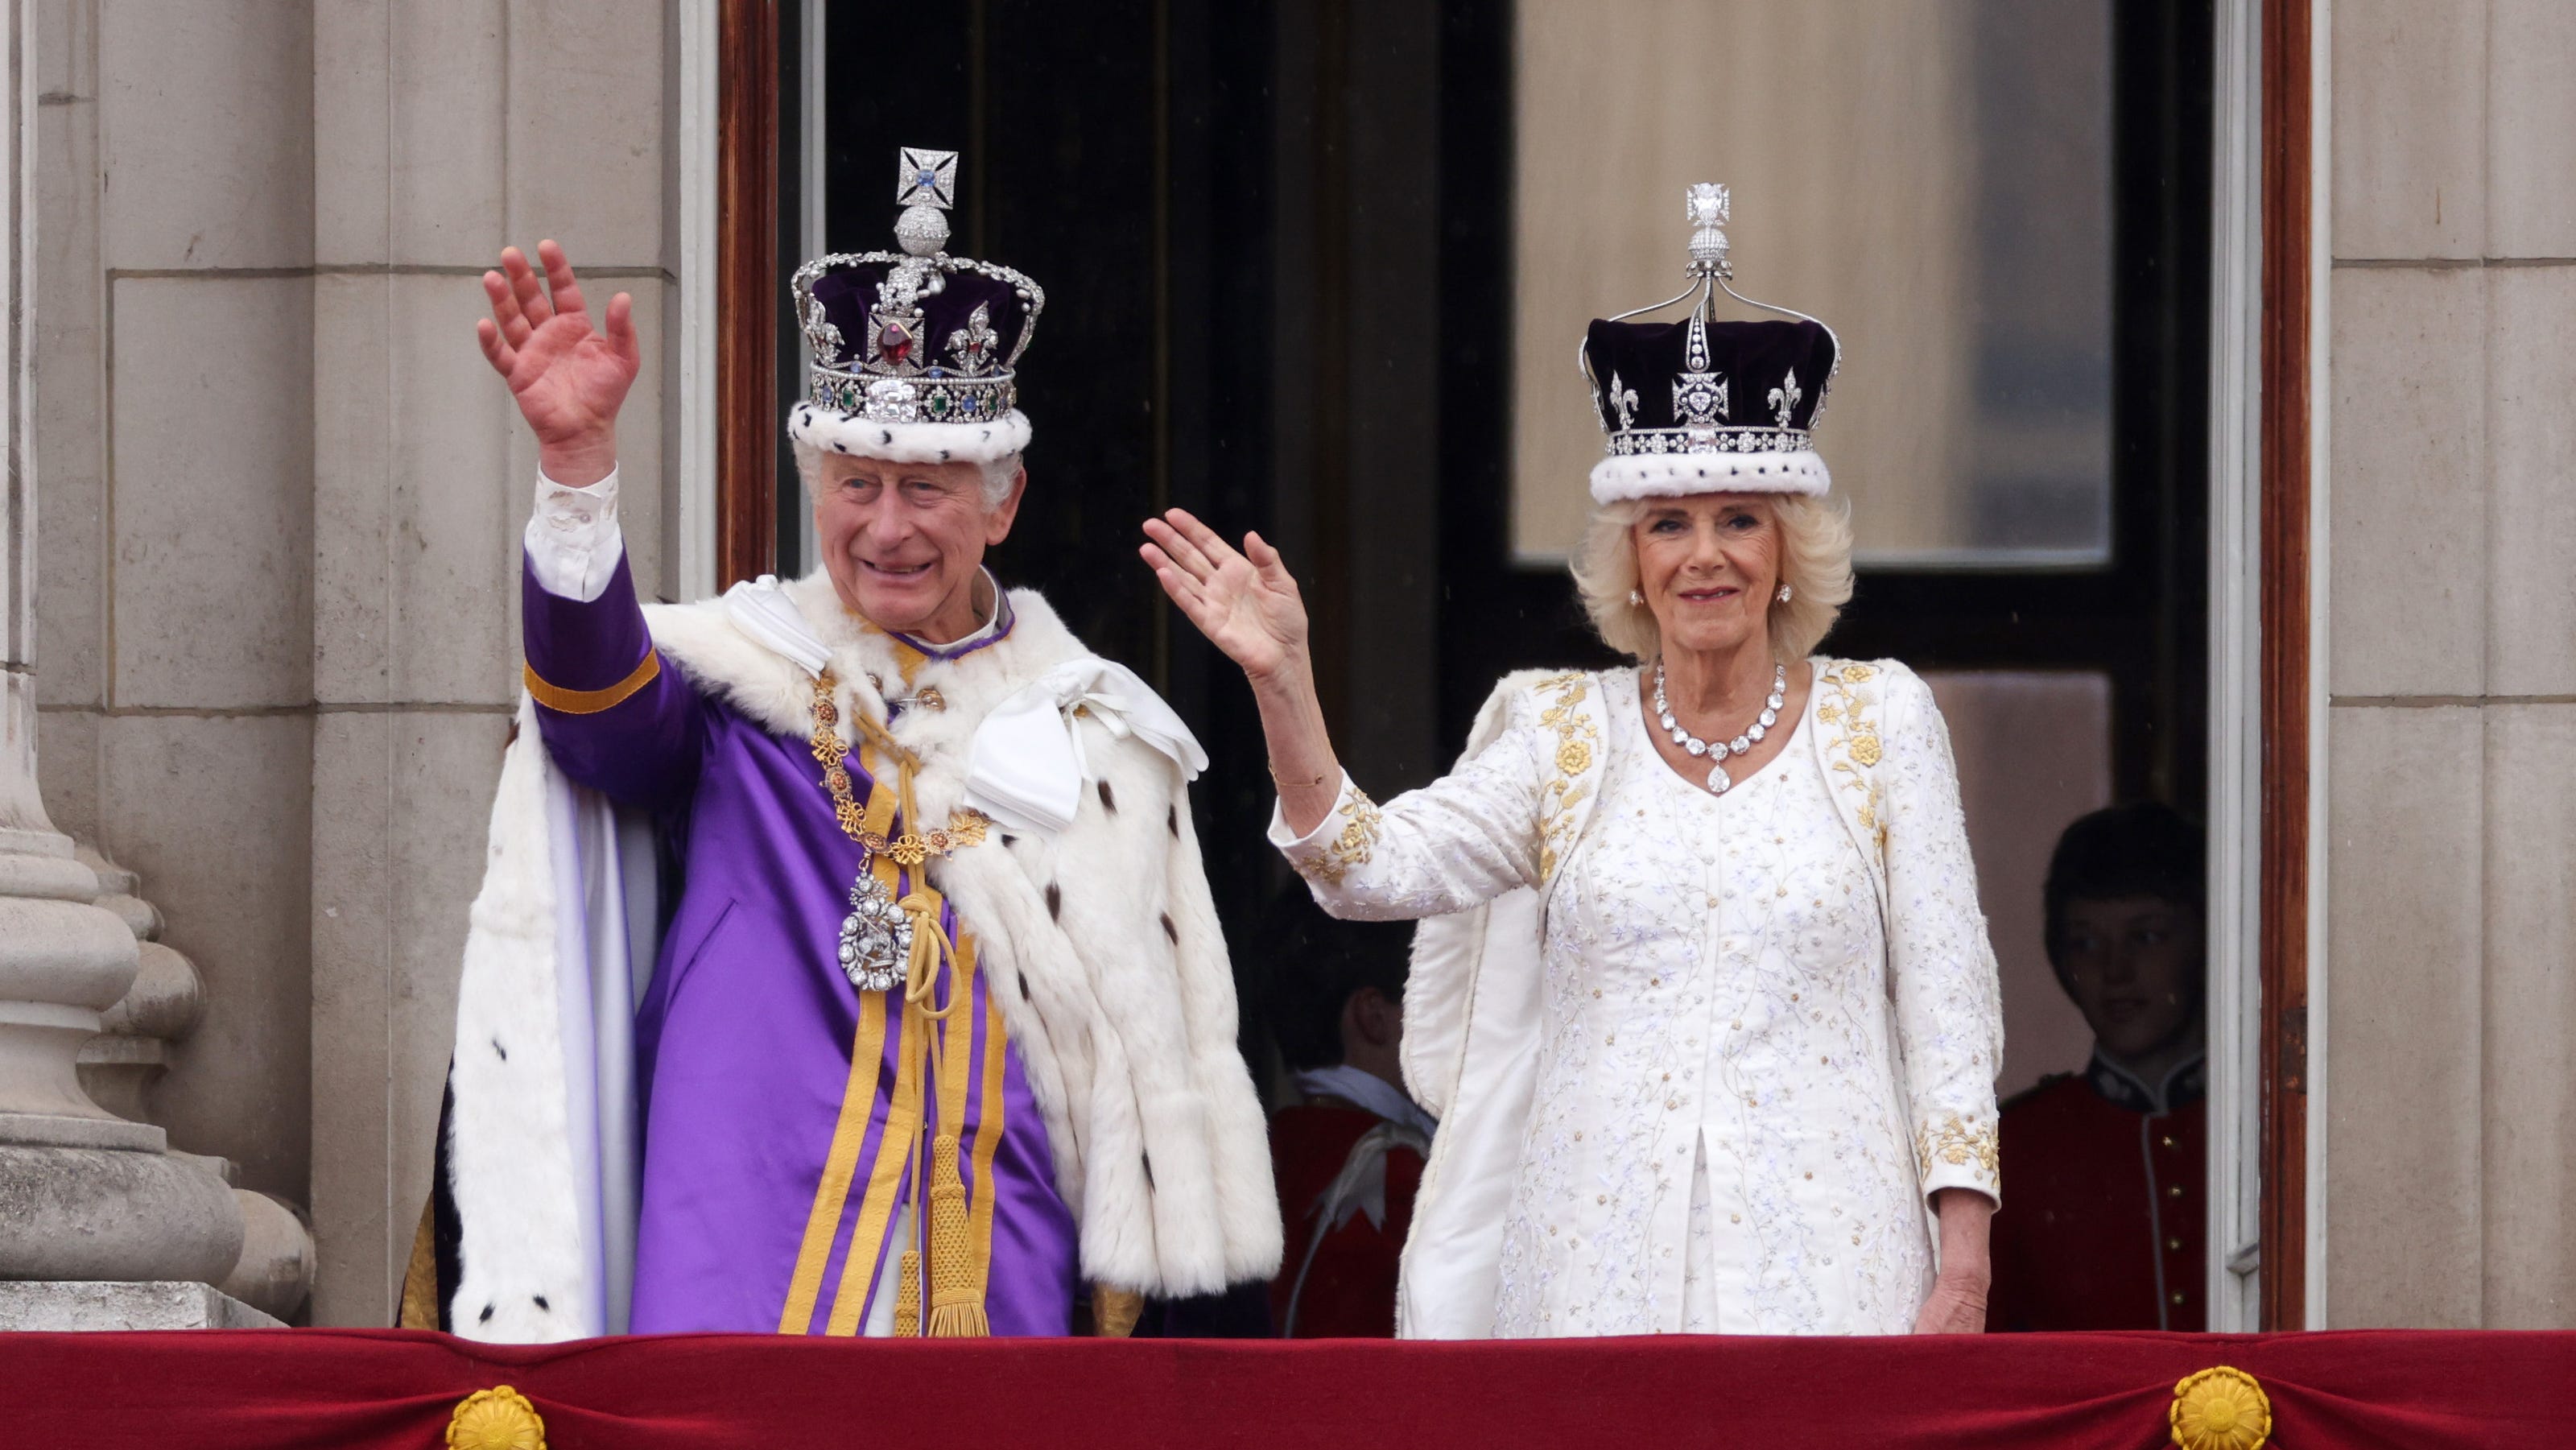 King Charles, royal family (not Harry) together on Buckingham Palace balcony: See the photos